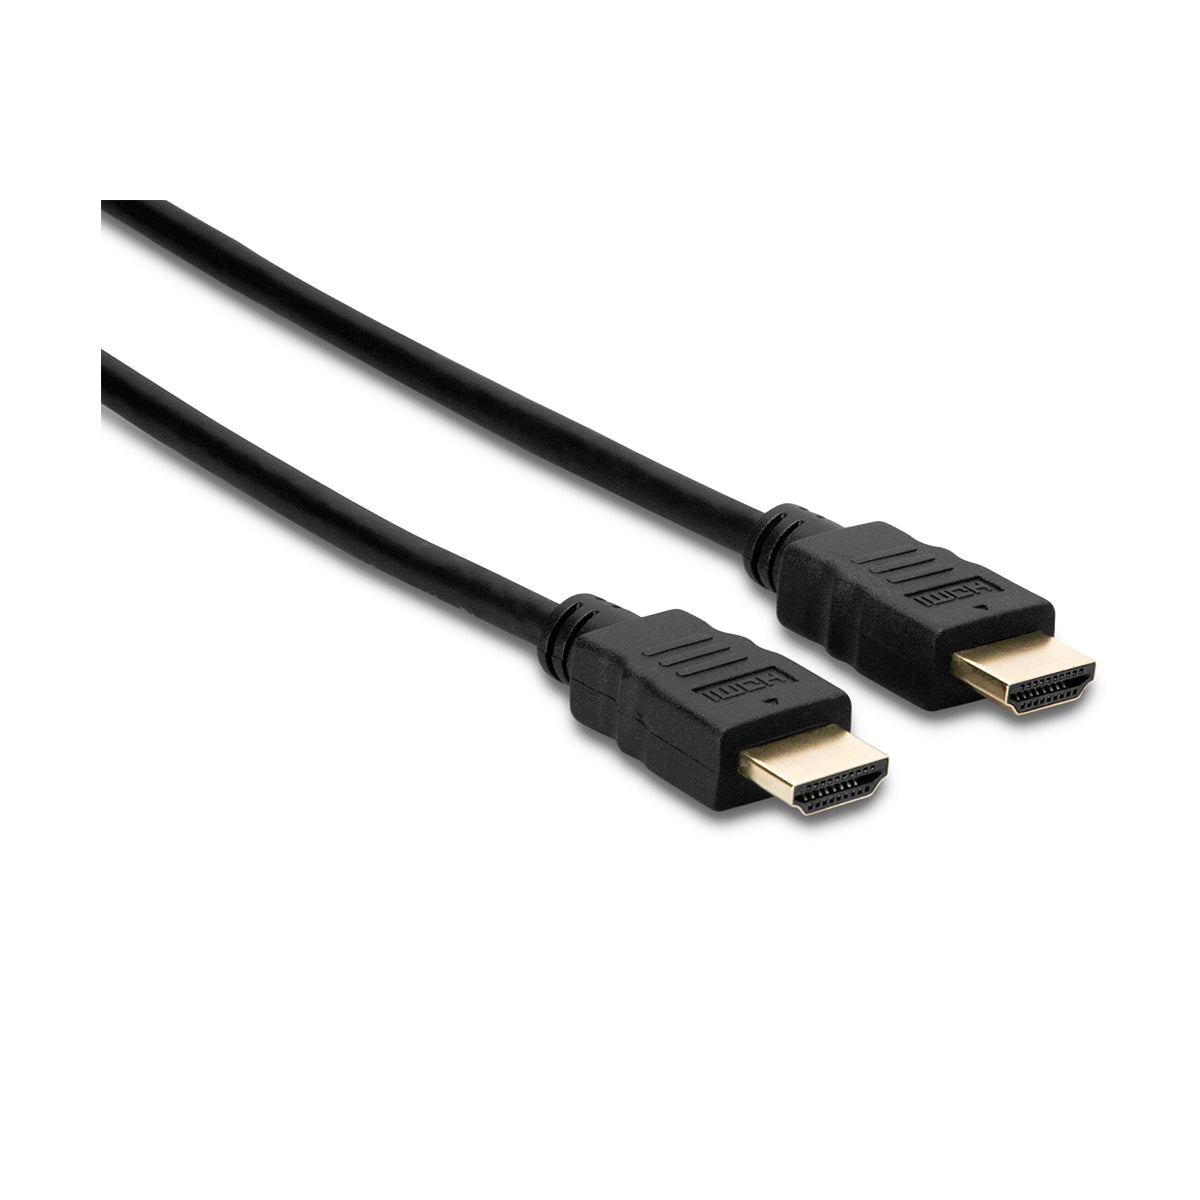 Hosa High Speed HDMI Cable - HDMI to HDMI, 10 ft